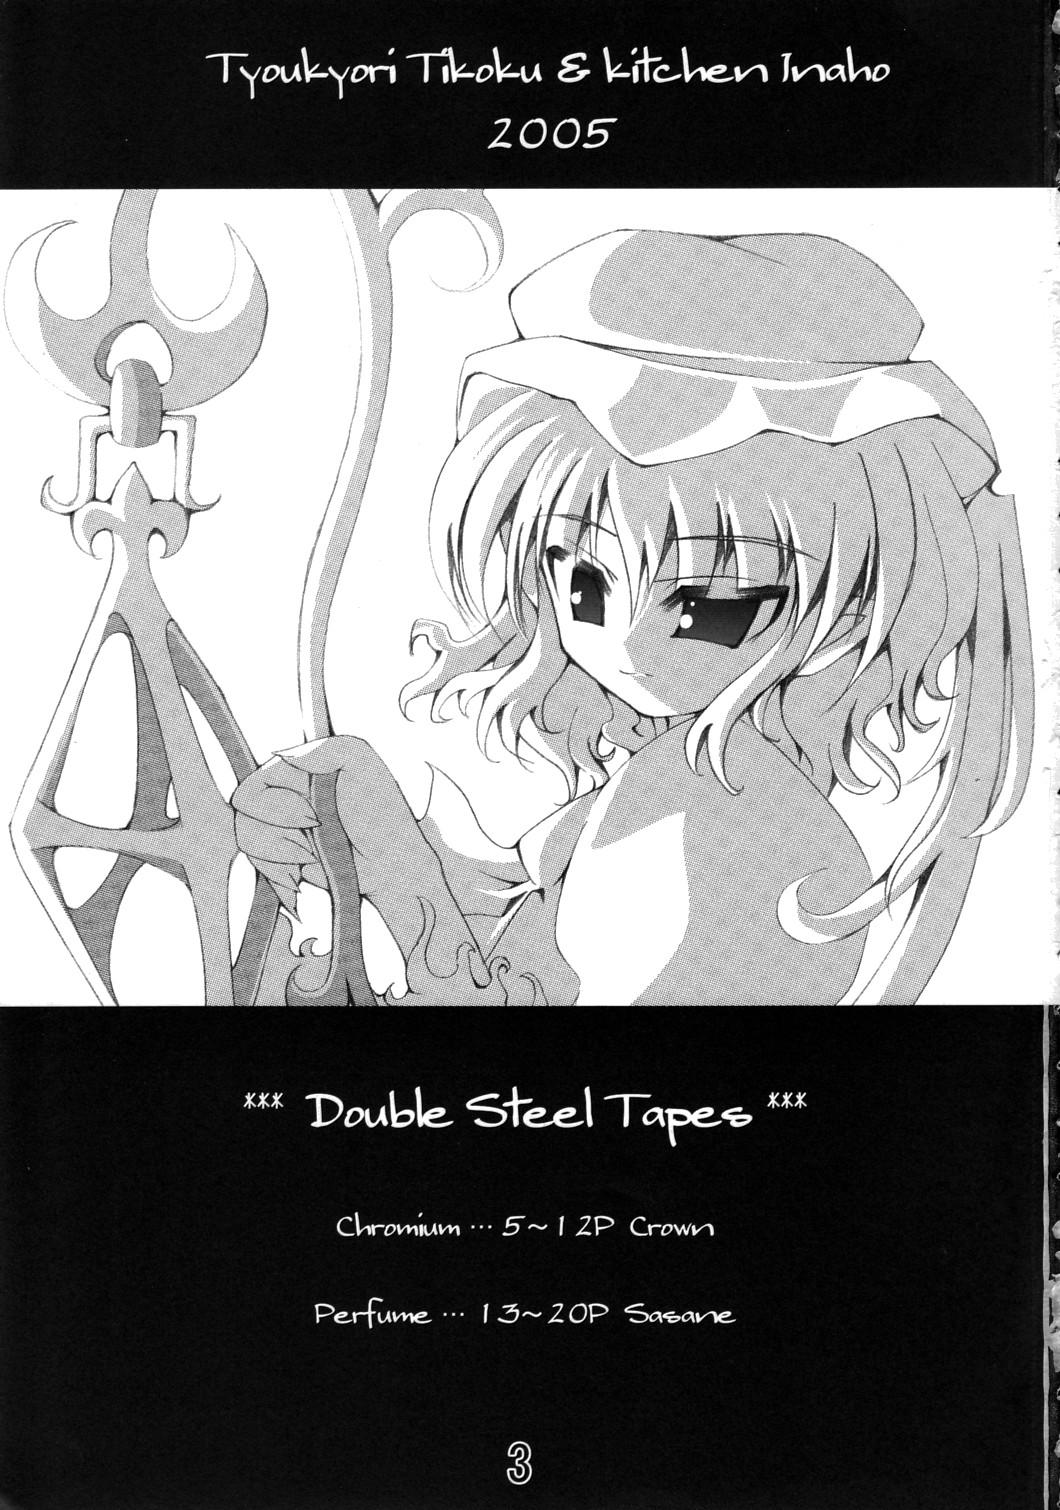 Sexcams Double Steel Tapes - Touhou project Huge Boobs - Page 2